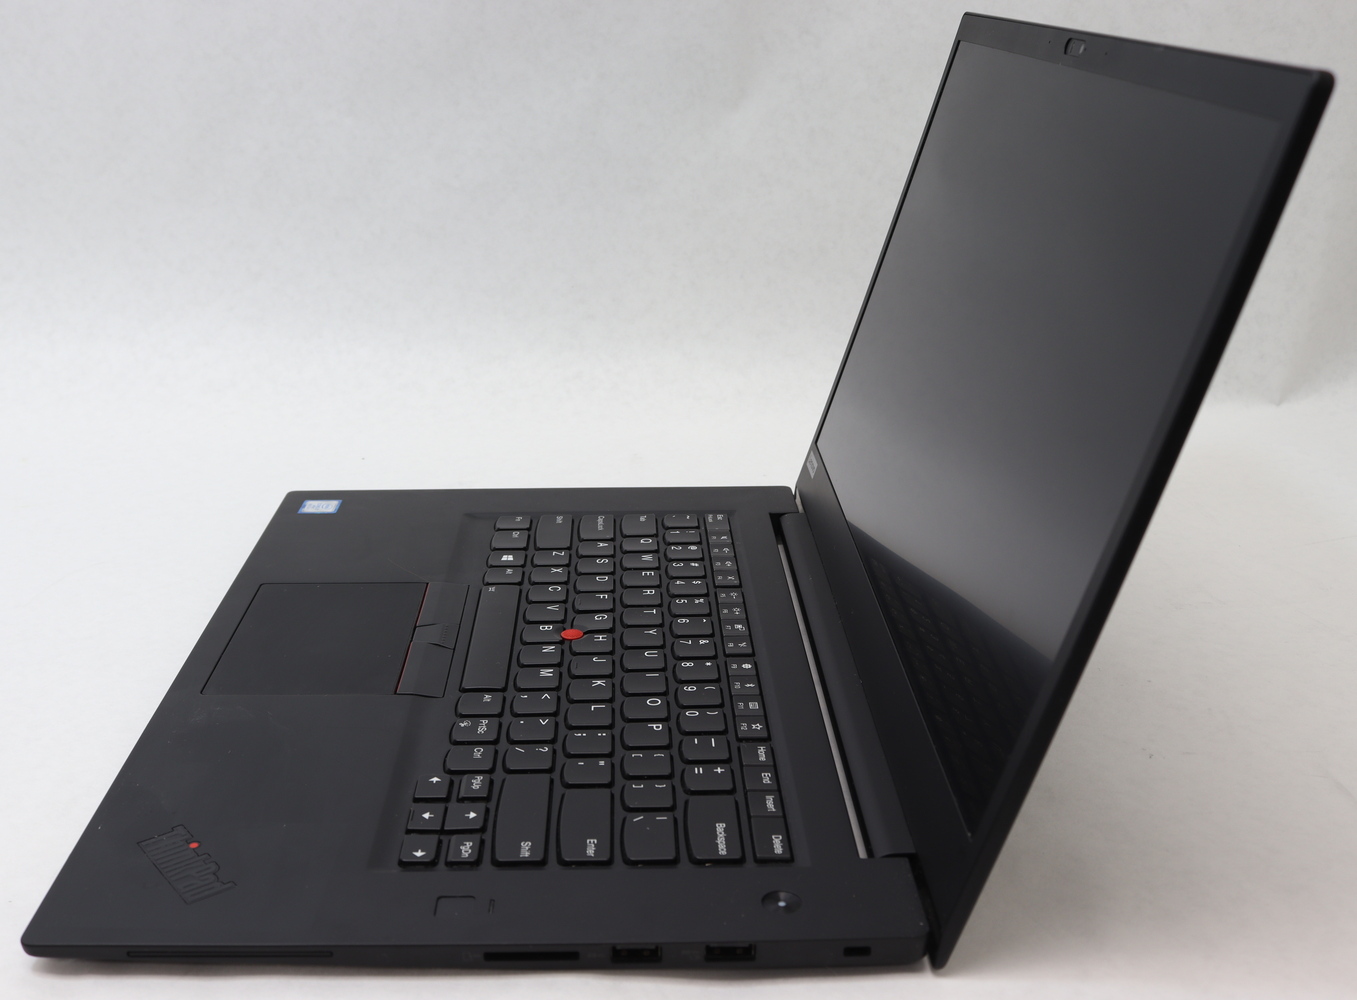 LENOVO THINKPAD P1 WINDOWS 10 PRO, 2.60GHZ, I7, 32.0GB WITH CHARGER